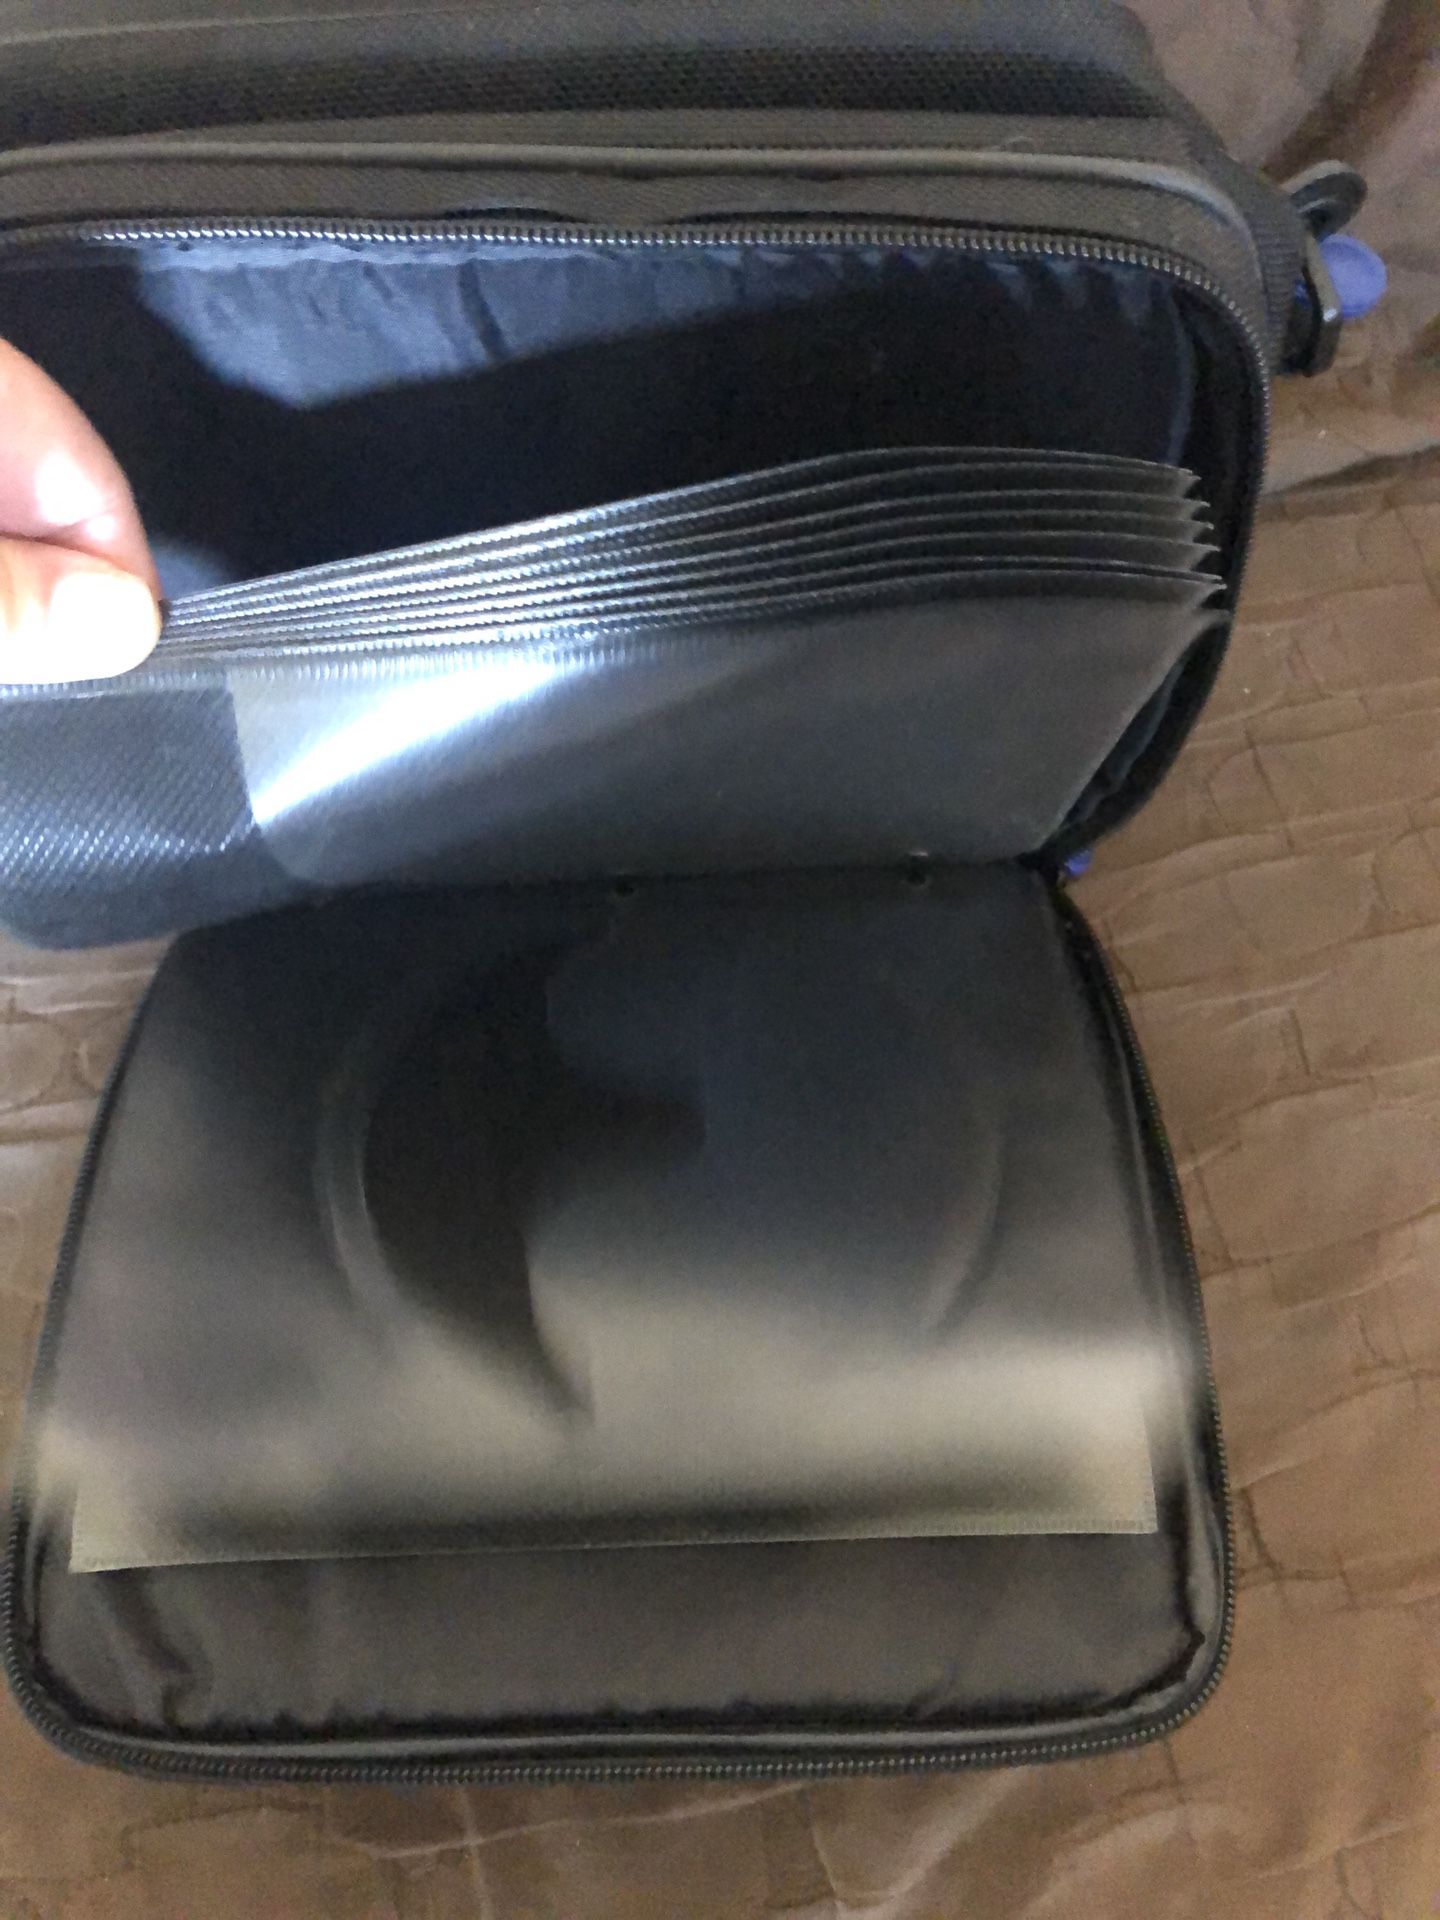 DVD carry case